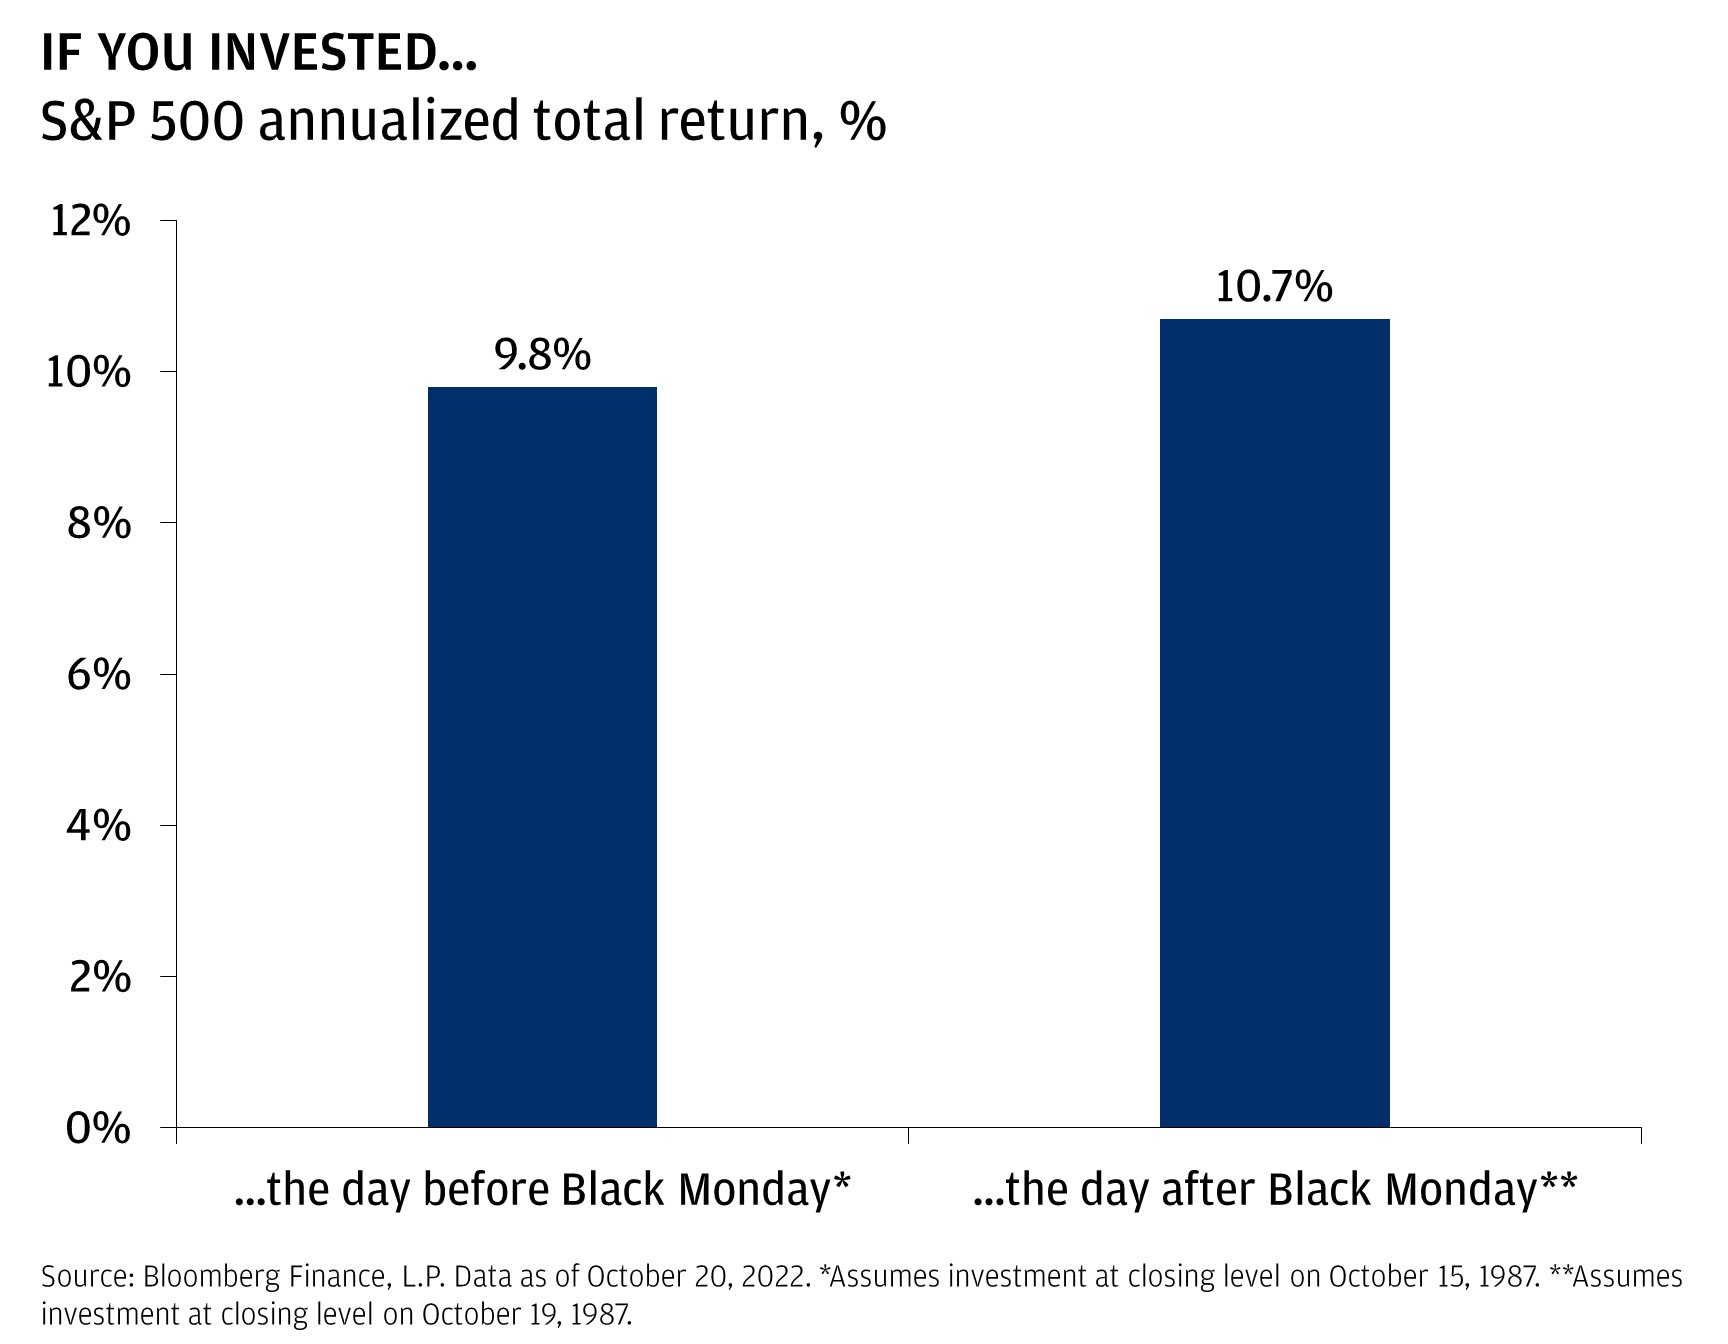 This charts shows the annualized S&P 500 total return if someone had invested the day before Black Monday (at the closing level on October 15, 1987) versus the day after Black Monday (at the closing level on October 19, 1987).